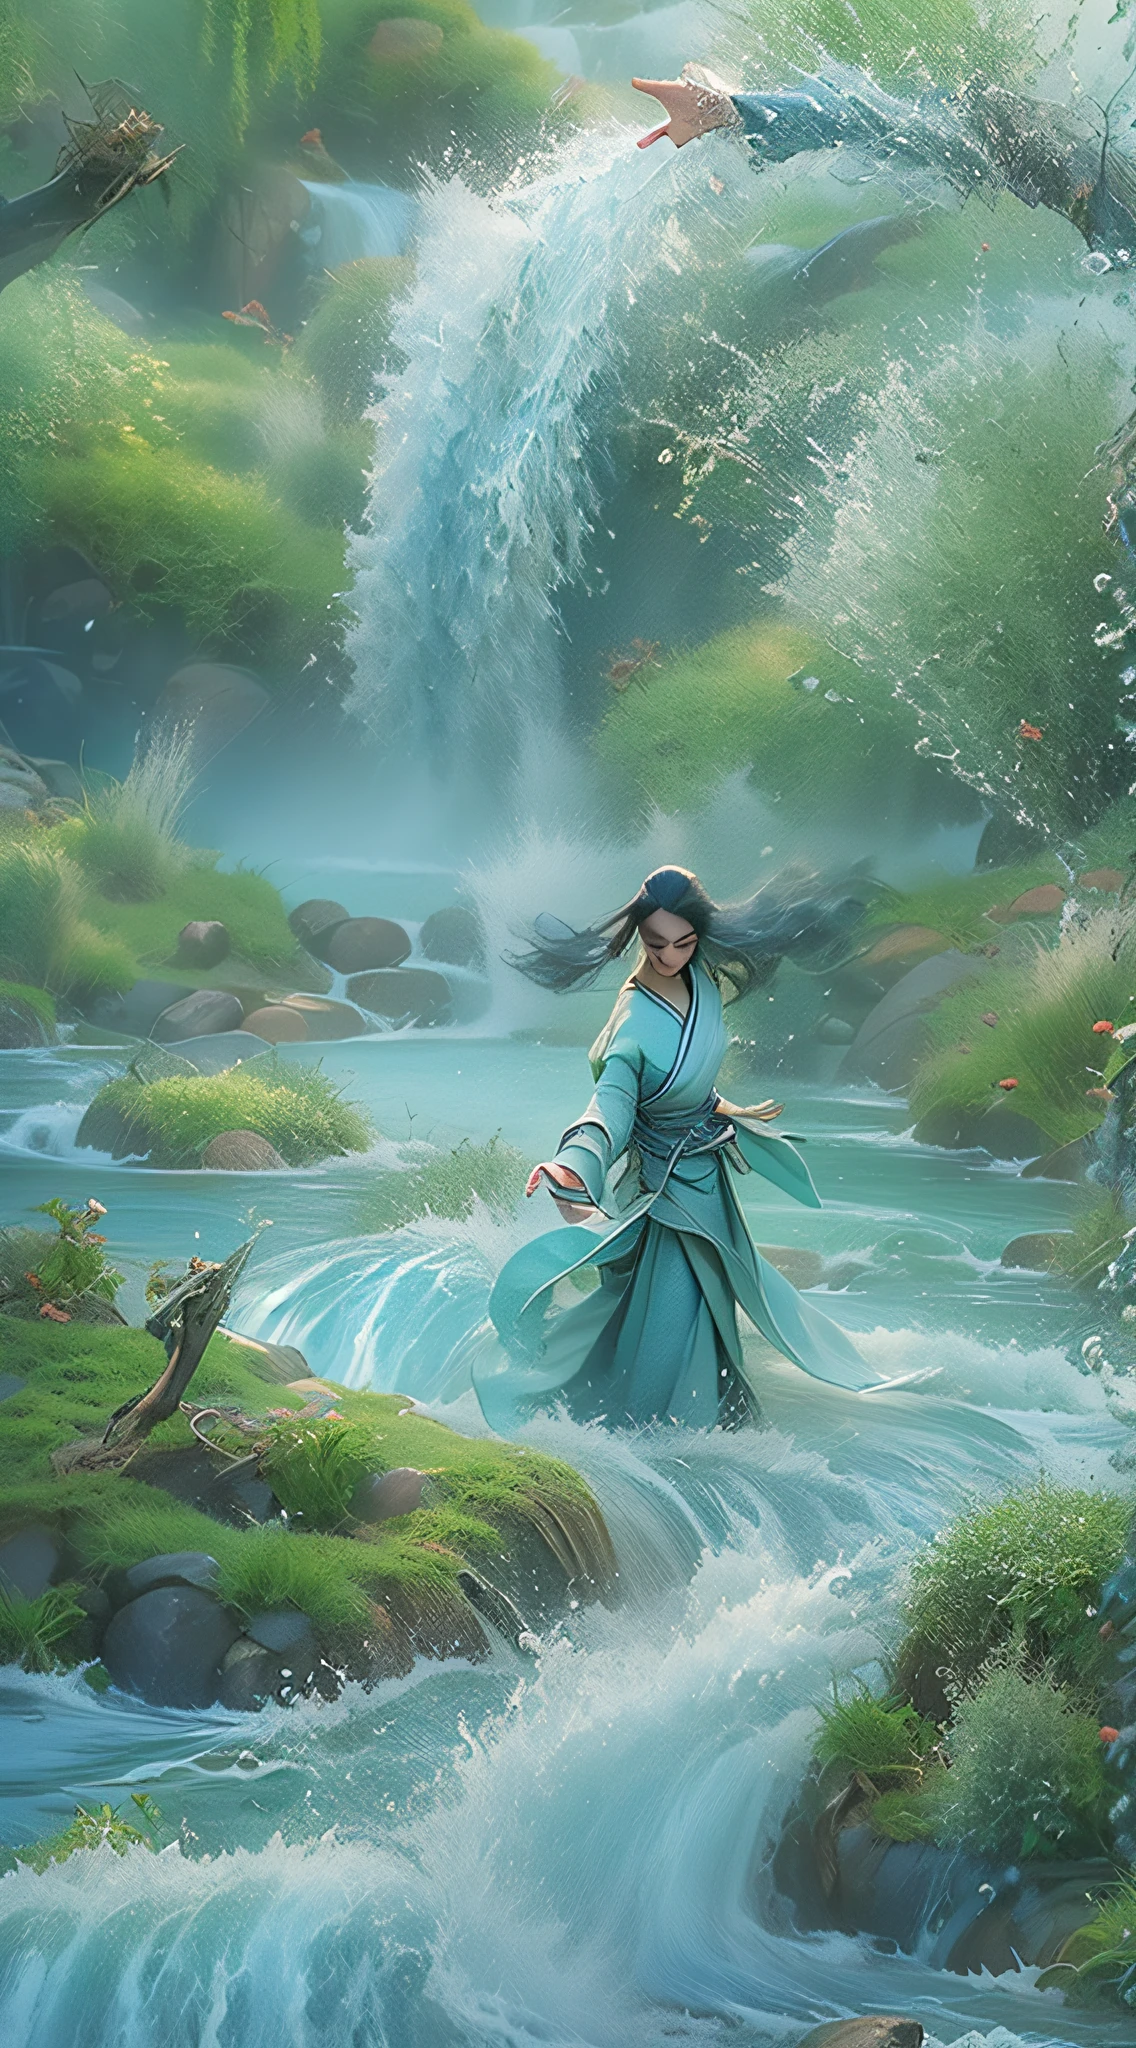 A manga character with a stoic expression, dressed in traditional waterbender attire, complete with swirling wave patterns. They stand on a peaceful riverbank, surrounded by lush vegetation and gentle willow trees. The character uses their water manipulation to create a serene waterfall that cascades gracefully into the river, forming a mesmerizing water display. The air is filled with a sense of tranquility and harmony as the character perfectly controls the water's movements. The style is reminiscent of traditional Japanese artwork, employing delicate brush strokes and soft colors, capturing the character's mastery of water with a touch of classical elegance.